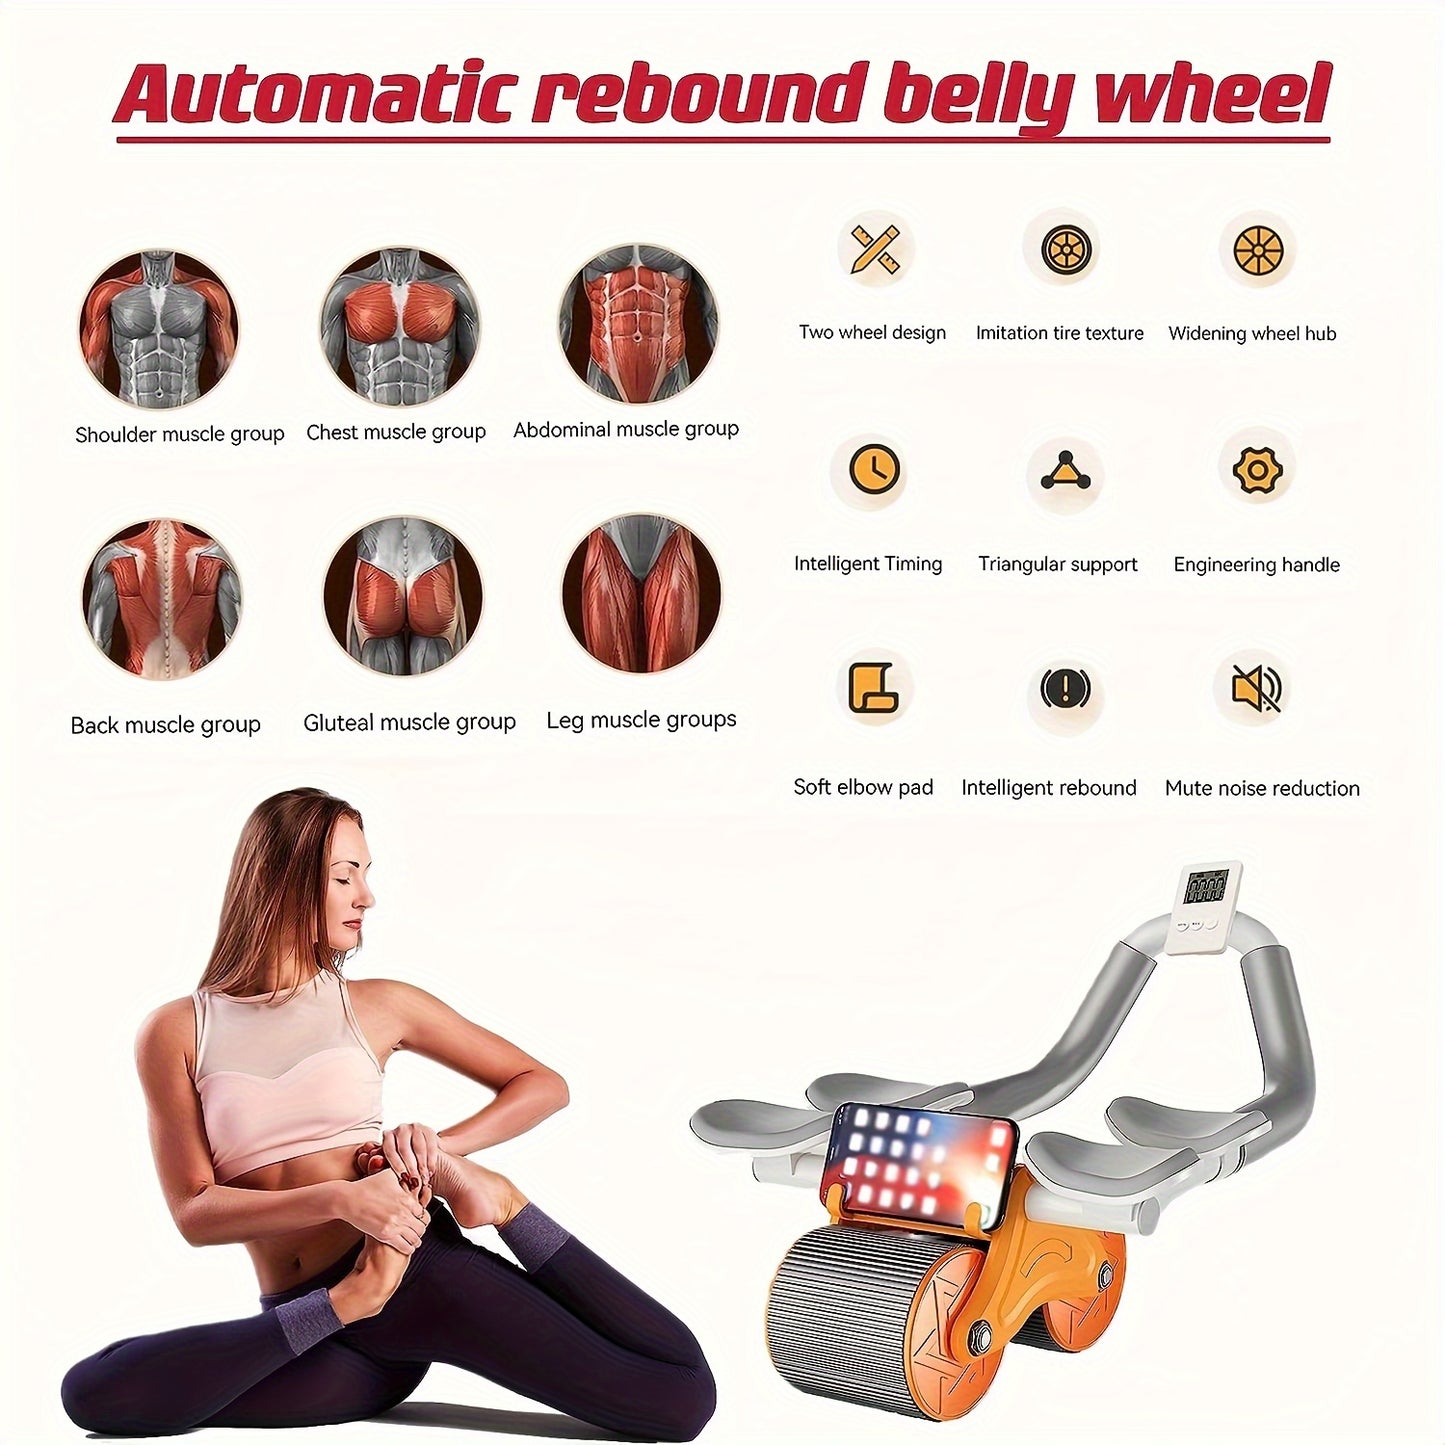 Automatic Rebound Abdominal Exercise Wheel With Knee Pads And Timer, Double Wheel Abdominal Roller, Core Strength Training Equipment Christmas Gift